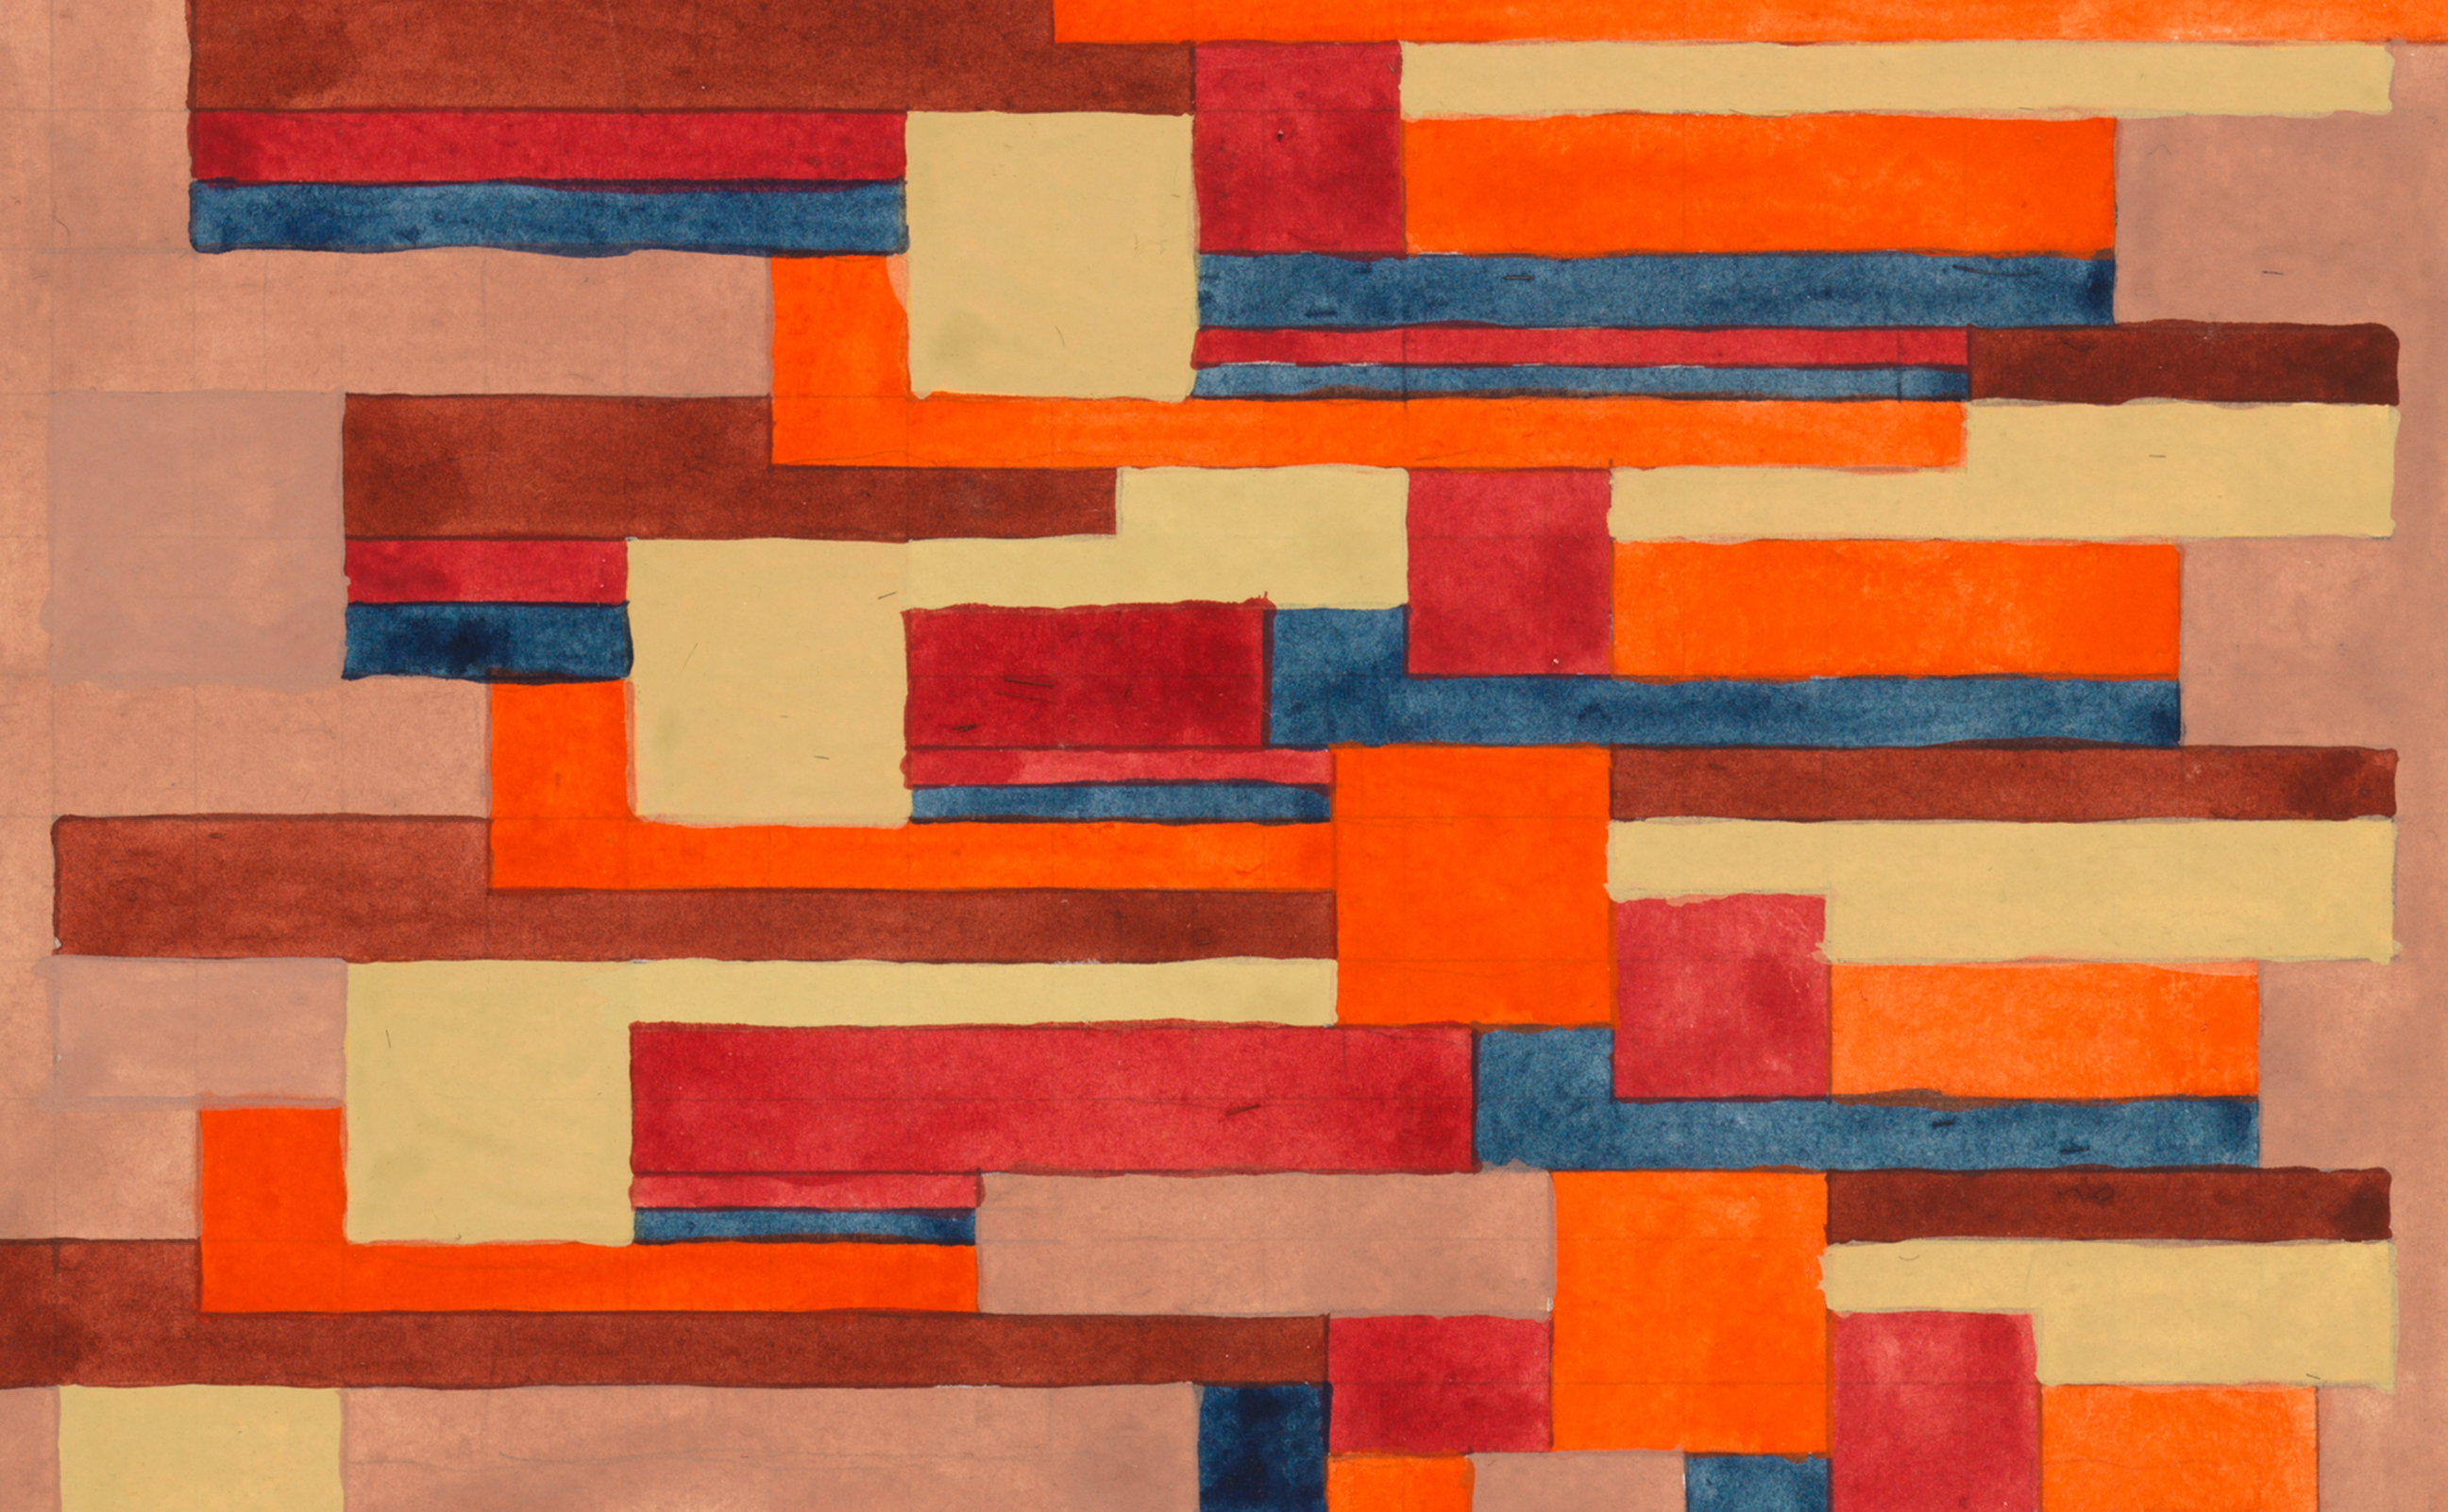 A weaving study for a course at the Bauhaus features squares and rectangles colored red, orange, tan, and blue.